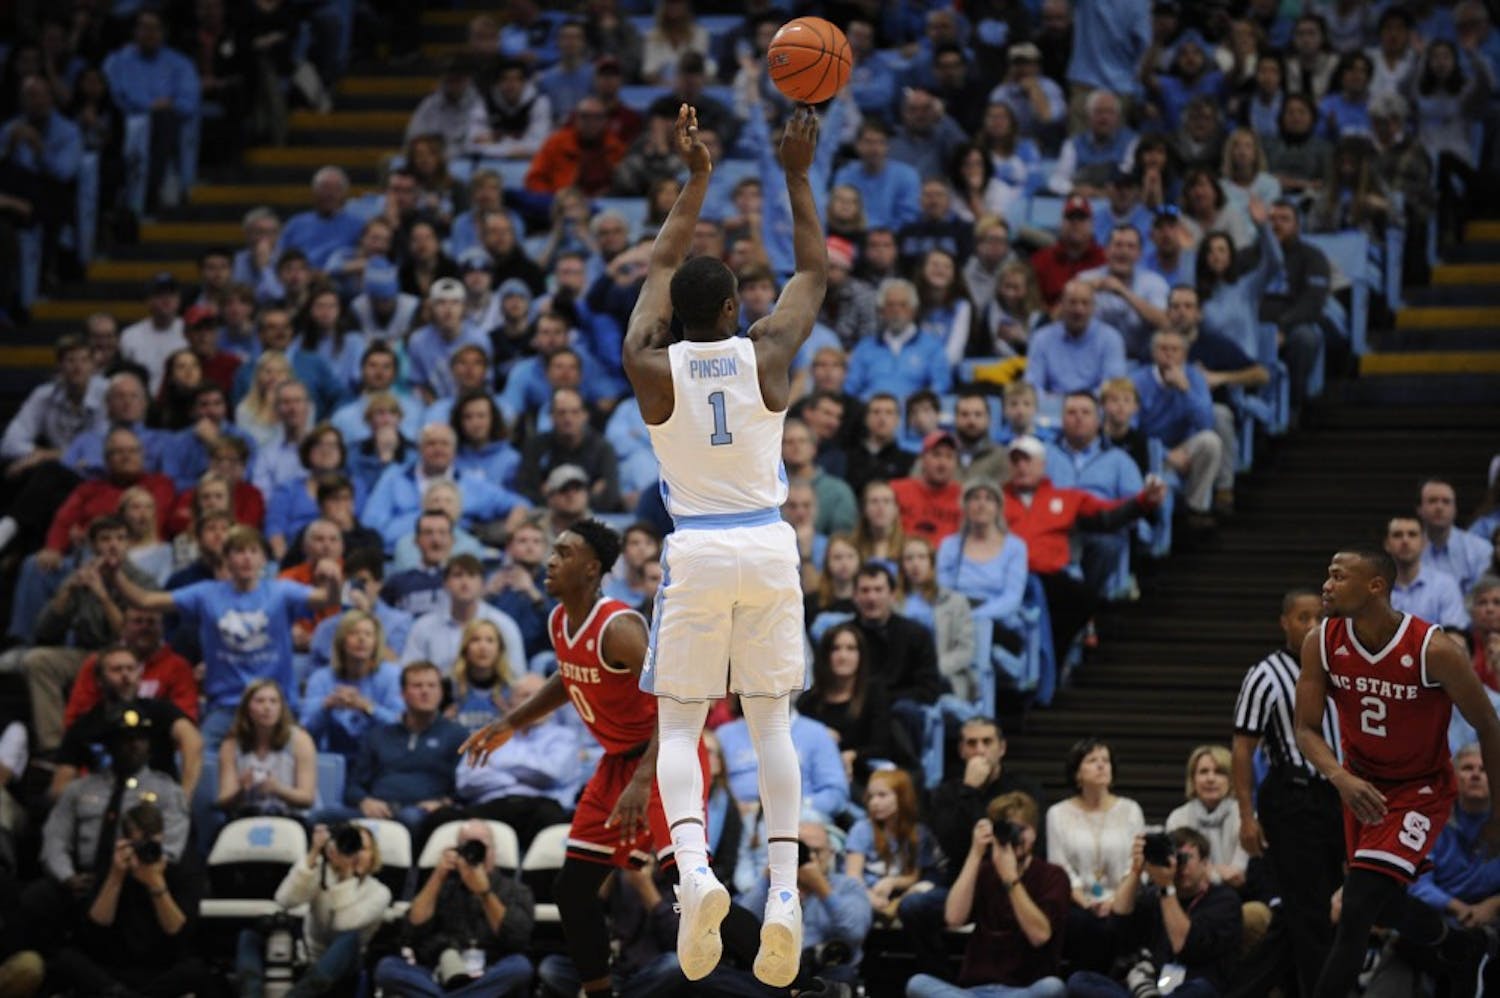 Junior&nbsp;Theo Pinson (1) pulls up for a three point shot.&nbsp;Pinson played his first game of the season against N.C. State on Sunday after injuring his food.&nbsp;